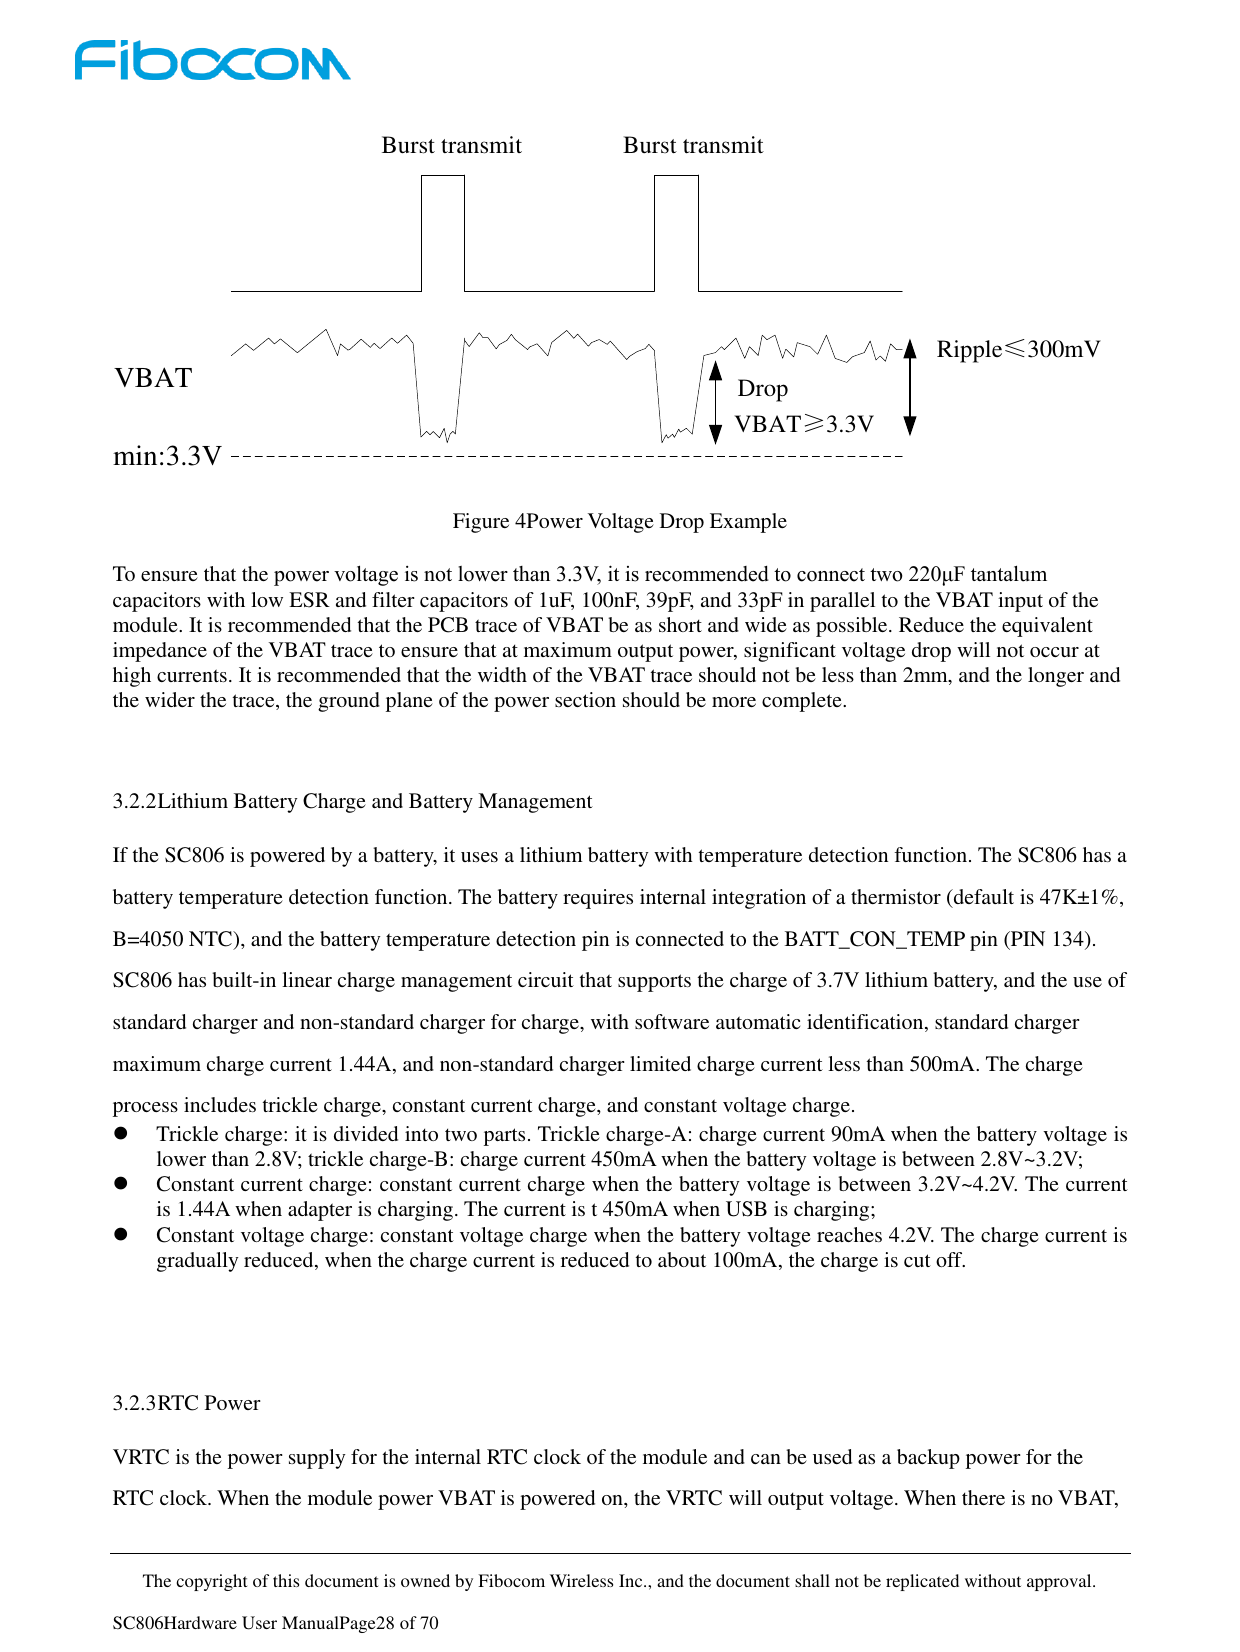     The copyright of this document is owned by Fibocom Wireless Inc., and the document shall not be replicated without approval.   SC806Hardware User ManualPage28 of 70 Burst transmit Burst transmitmin:3.3VVBAT Ripple≤300mVDrop VBAT≥3.3V Figure 4Power Voltage Drop Example  To ensure that the power voltage is not lower than 3.3V, it is recommended to connect two 220μF tantalum capacitors with low ESR and filter capacitors of 1uF, 100nF, 39pF, and 33pF in parallel to the VBAT input of the module. It is recommended that the PCB trace of VBAT be as short and wide as possible. Reduce the equivalent impedance of the VBAT trace to ensure that at maximum output power, significant voltage drop will not occur at high currents. It is recommended that the width of the VBAT trace should not be less than 2mm, and the longer and the wider the trace, the ground plane of the power section should be more complete.   3.2.2 Lithium Battery Charge and Battery Management If the SC806 is powered by a battery, it uses a lithium battery with temperature detection function. The SC806 has a battery temperature detection function. The battery requires internal integration of a thermistor (default is 47K±1%, B=4050 NTC), and the battery temperature detection pin is connected to the BATT_CON_TEMP pin (PIN 134). SC806 has built-in linear charge management circuit that supports the charge of 3.7V lithium battery, and the use of standard charger and non-standard charger for charge, with software automatic identification, standard charger maximum charge current 1.44A, and non-standard charger limited charge current less than 500mA. The charge process includes trickle charge, constant current charge, and constant voltage charge.  Trickle charge: it is divided into two parts. Trickle charge-A: charge current 90mA when the battery voltage is lower than 2.8V; trickle charge-B: charge current 450mA when the battery voltage is between 2.8V~3.2V;  Constant current charge: constant current charge when the battery voltage is between 3.2V~4.2V. The current is 1.44A when adapter is charging. The current is t 450mA when USB is charging;  Constant voltage charge: constant voltage charge when the battery voltage reaches 4.2V. The charge current is gradually reduced, when the charge current is reduced to about 100mA, the charge is cut off.    3.2.3 RTC Power VRTC is the power supply for the internal RTC clock of the module and can be used as a backup power for the RTC clock. When the module power VBAT is powered on, the VRTC will output voltage. When there is no VBAT, 